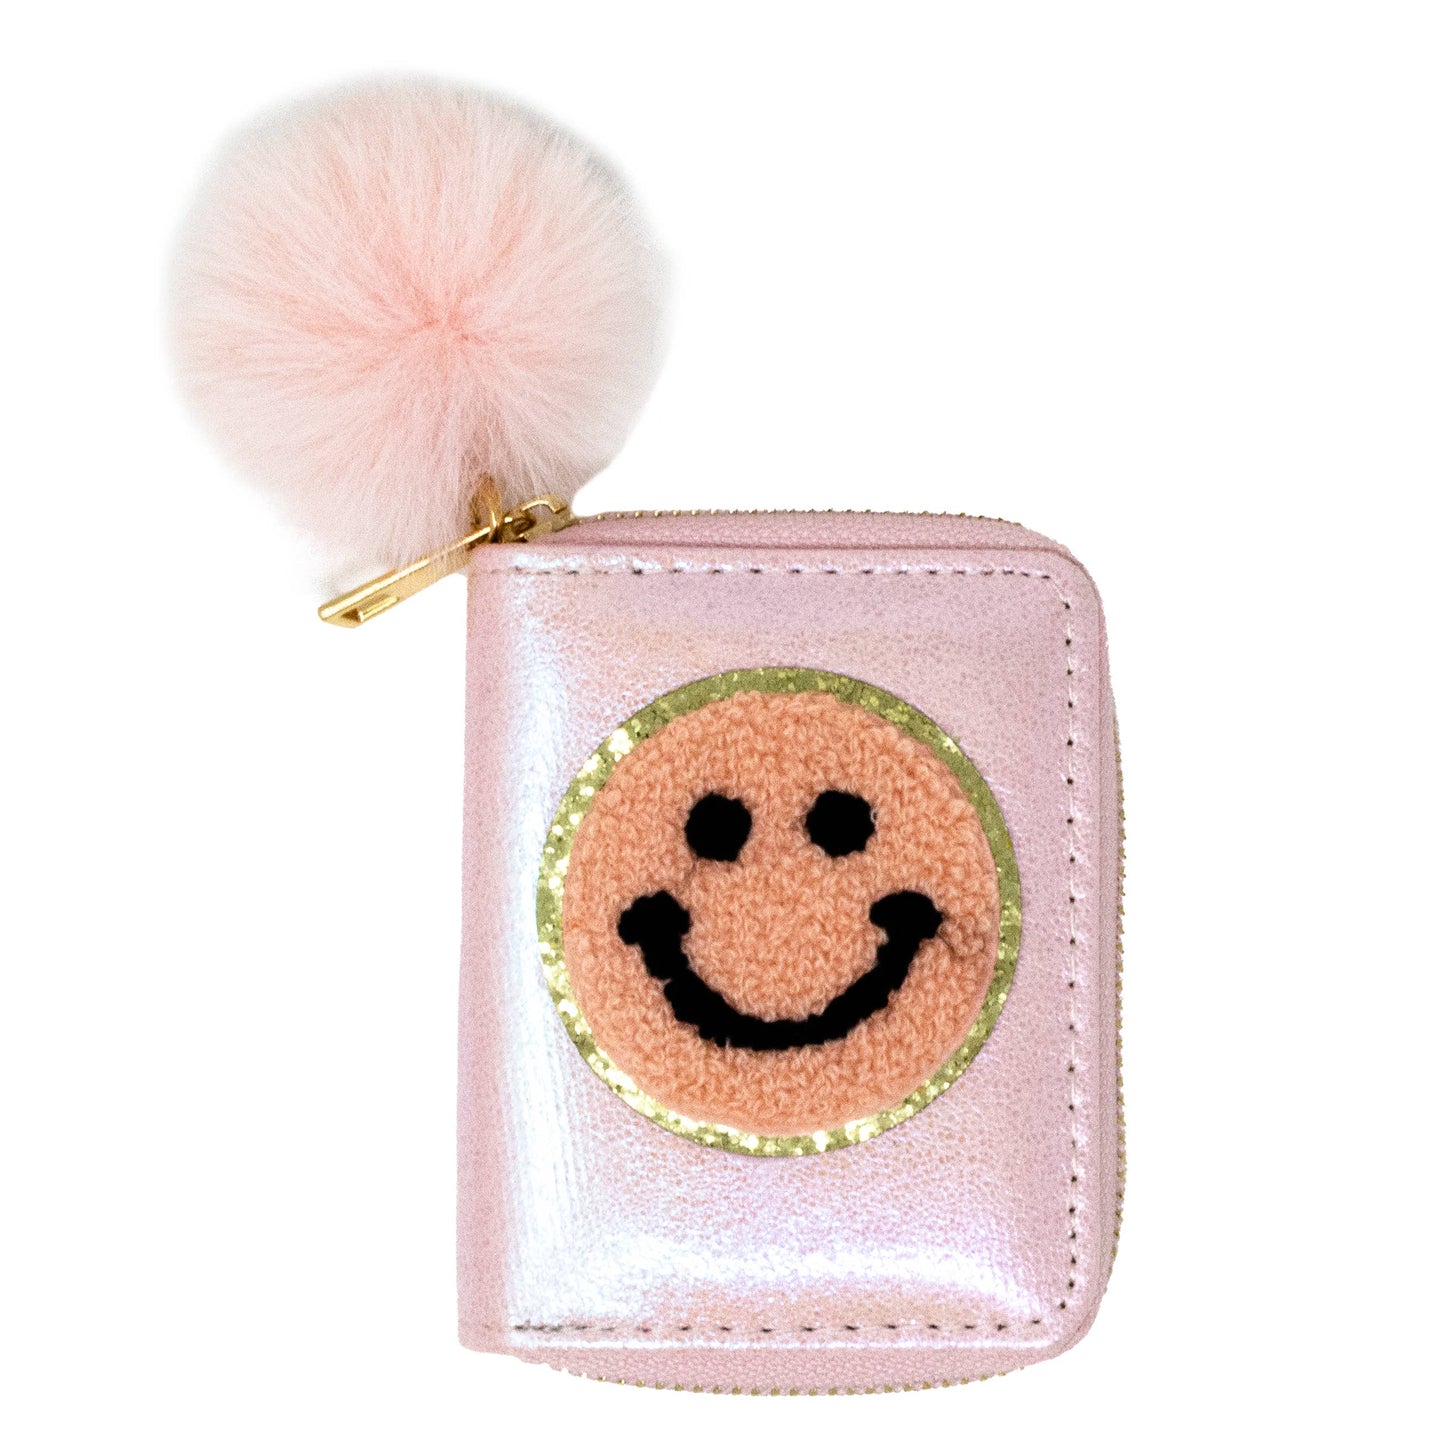 Shiny Happy Face Smile Wallet: Hot Pink